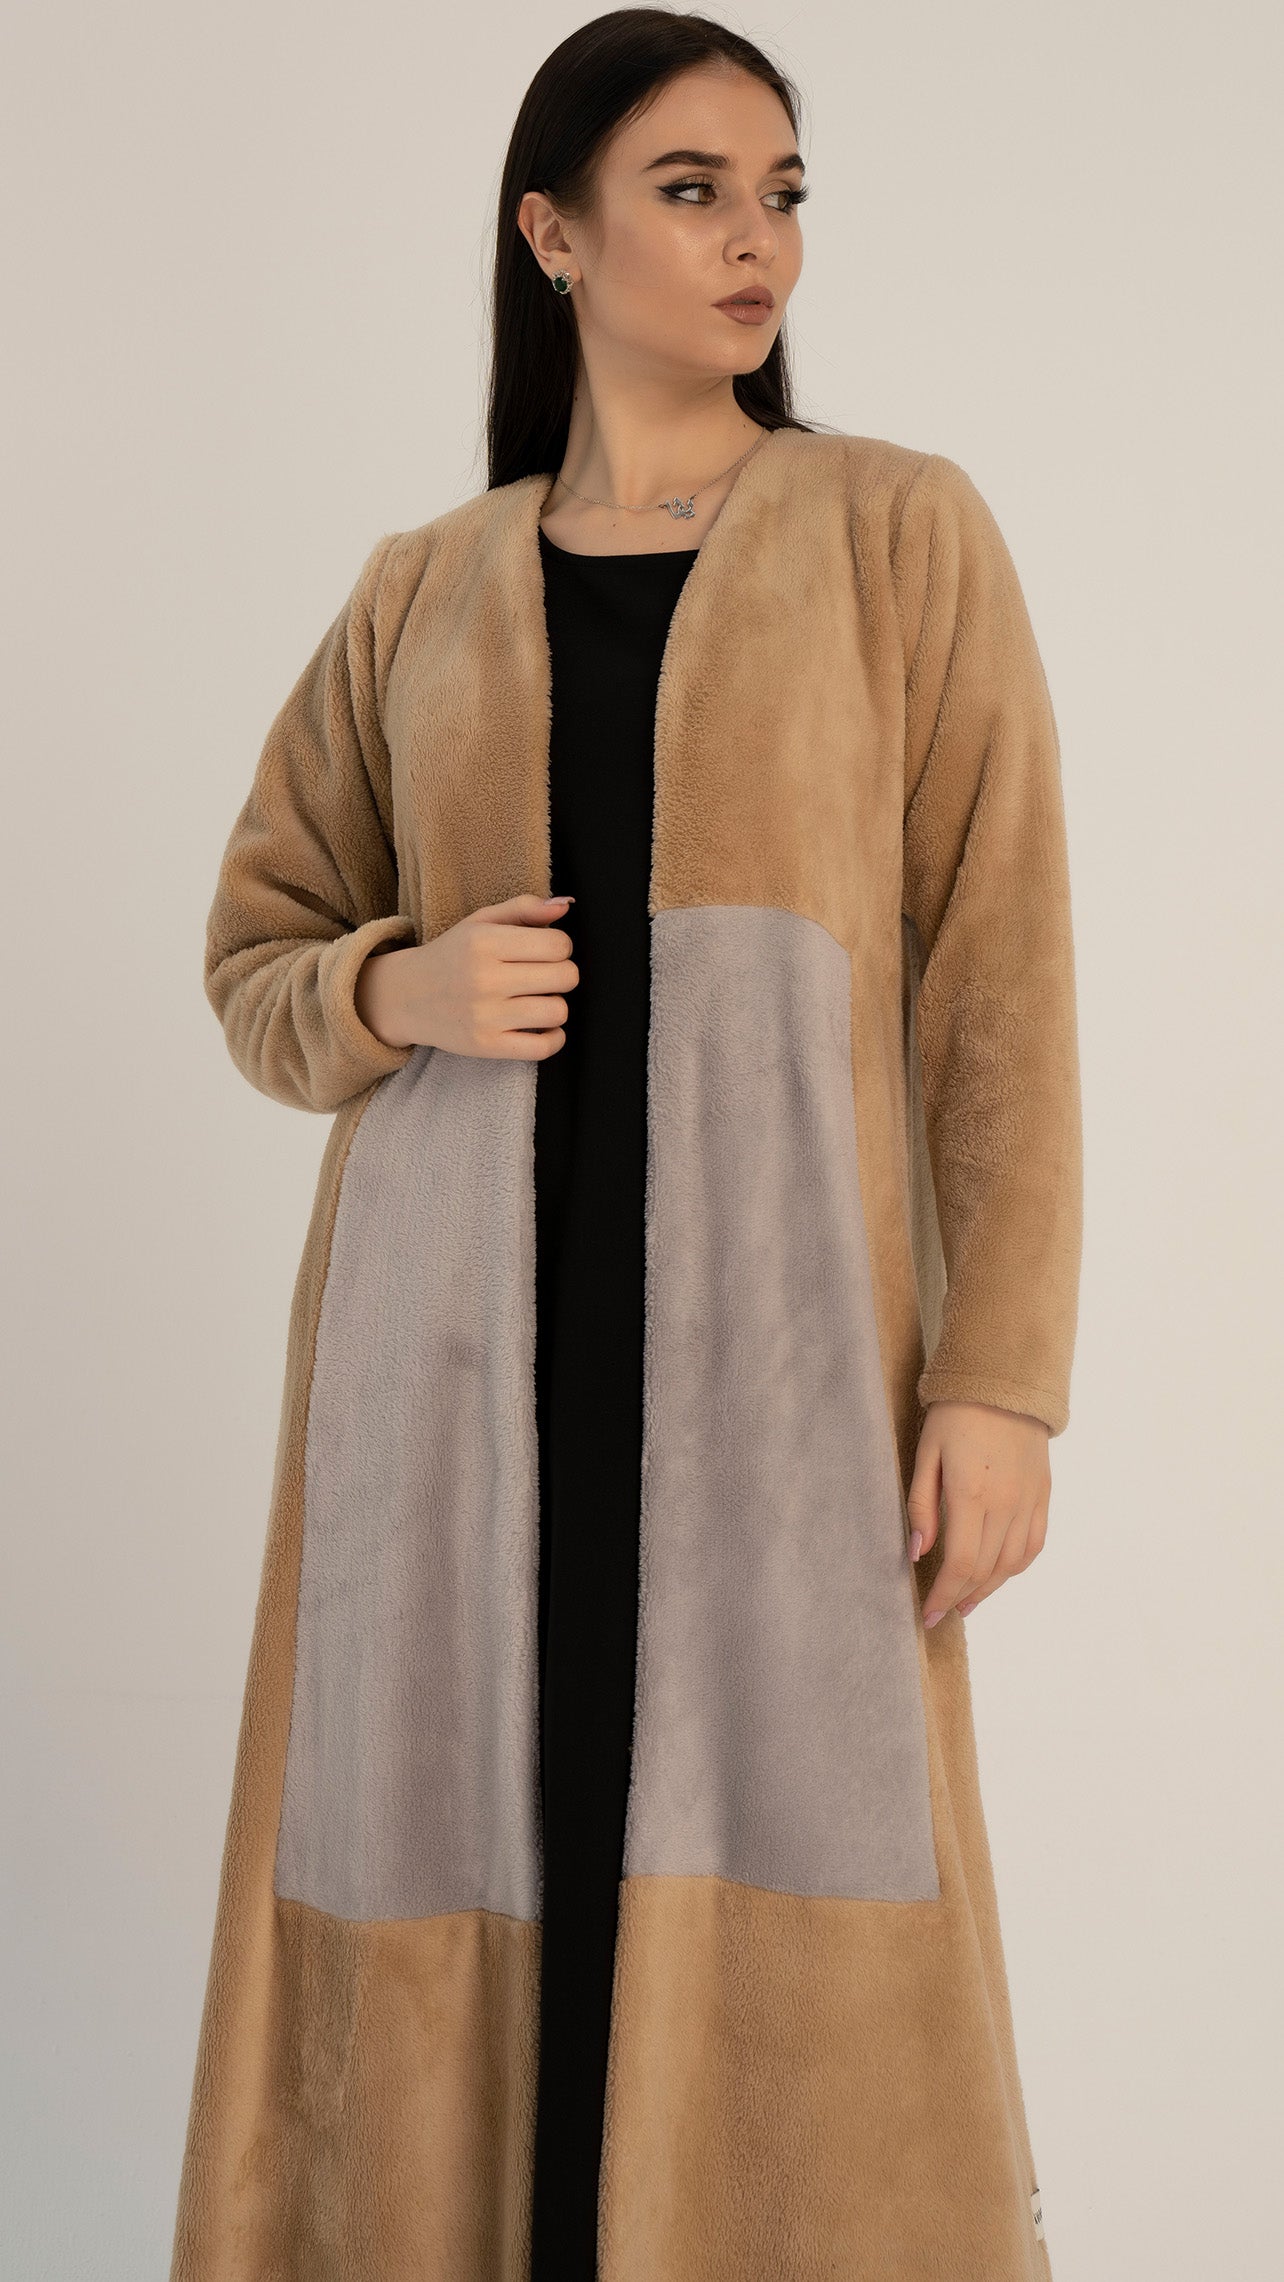 Soft textured abaya with color block pattern on front.